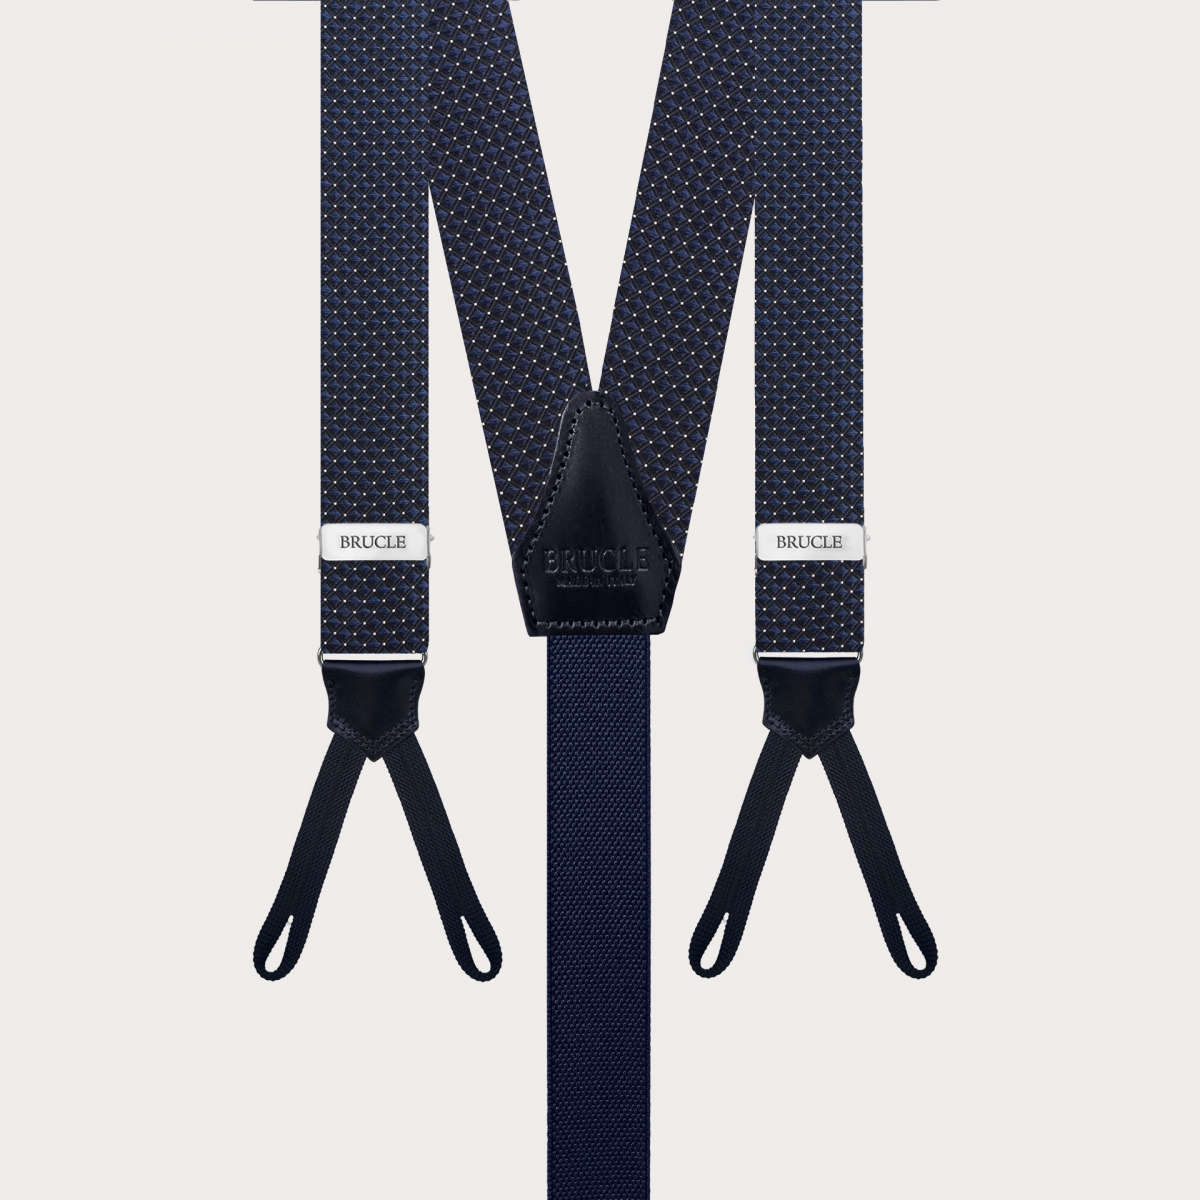 Men's narrow silk braces suspenders with blue pinhead pattern for buttons